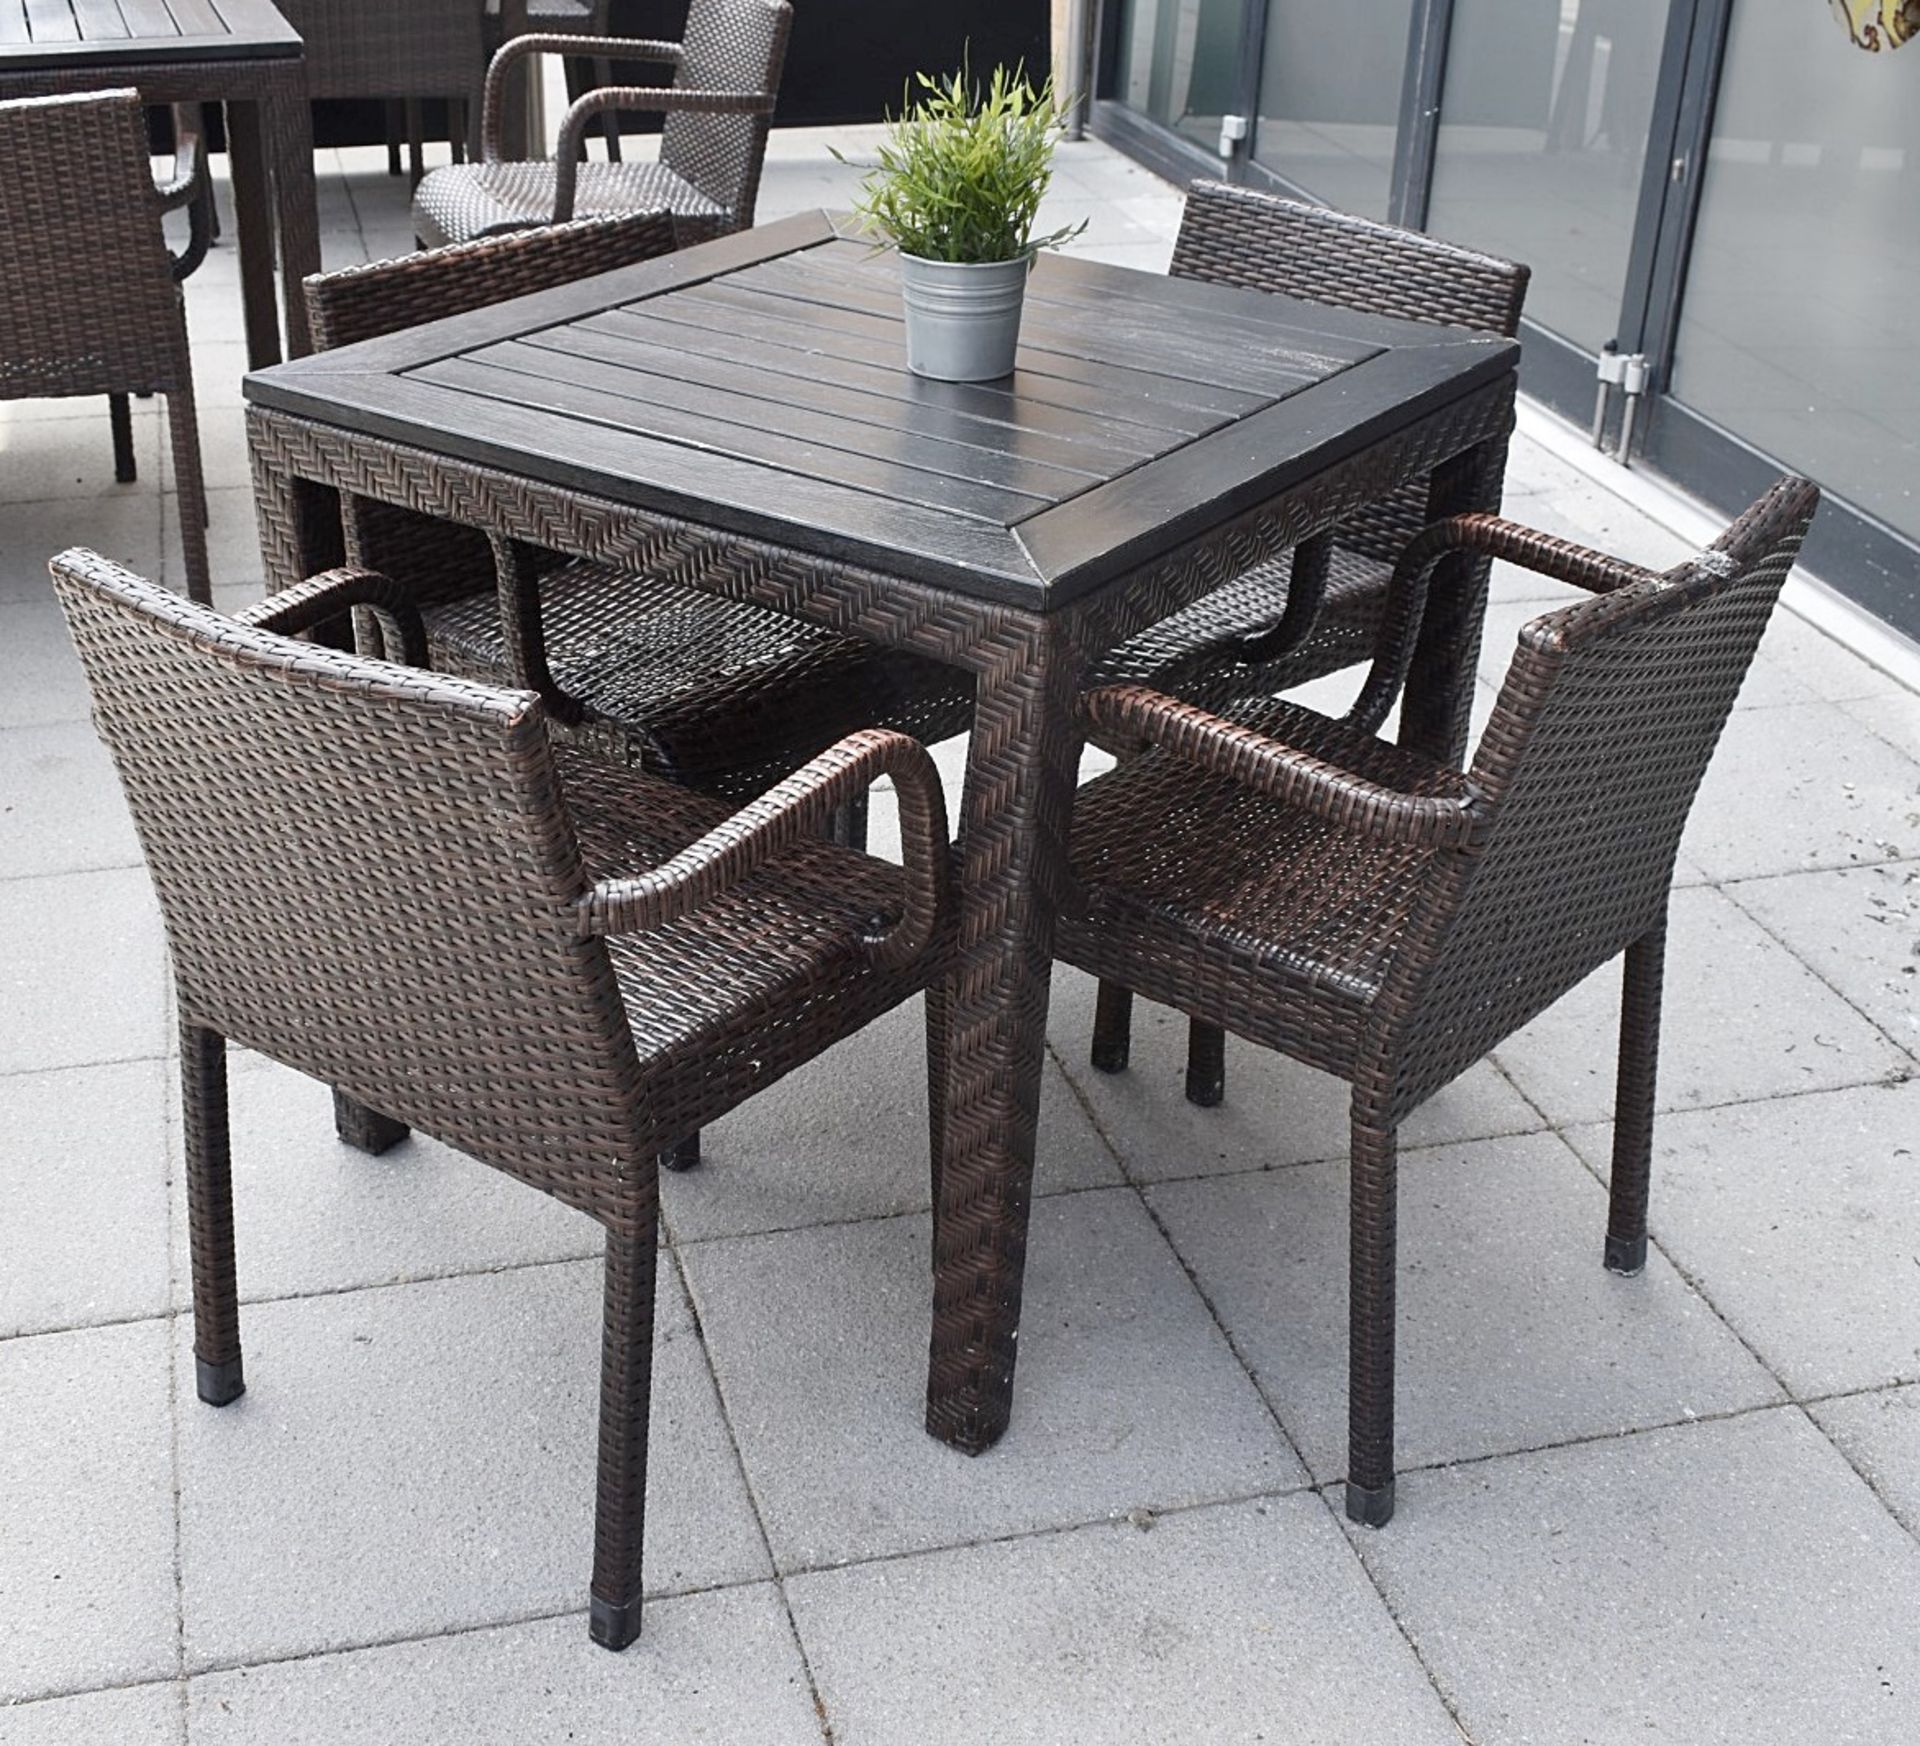 4 x Outdoor Rattan Garden Chairs With A Matching Square Table - Image 2 of 5